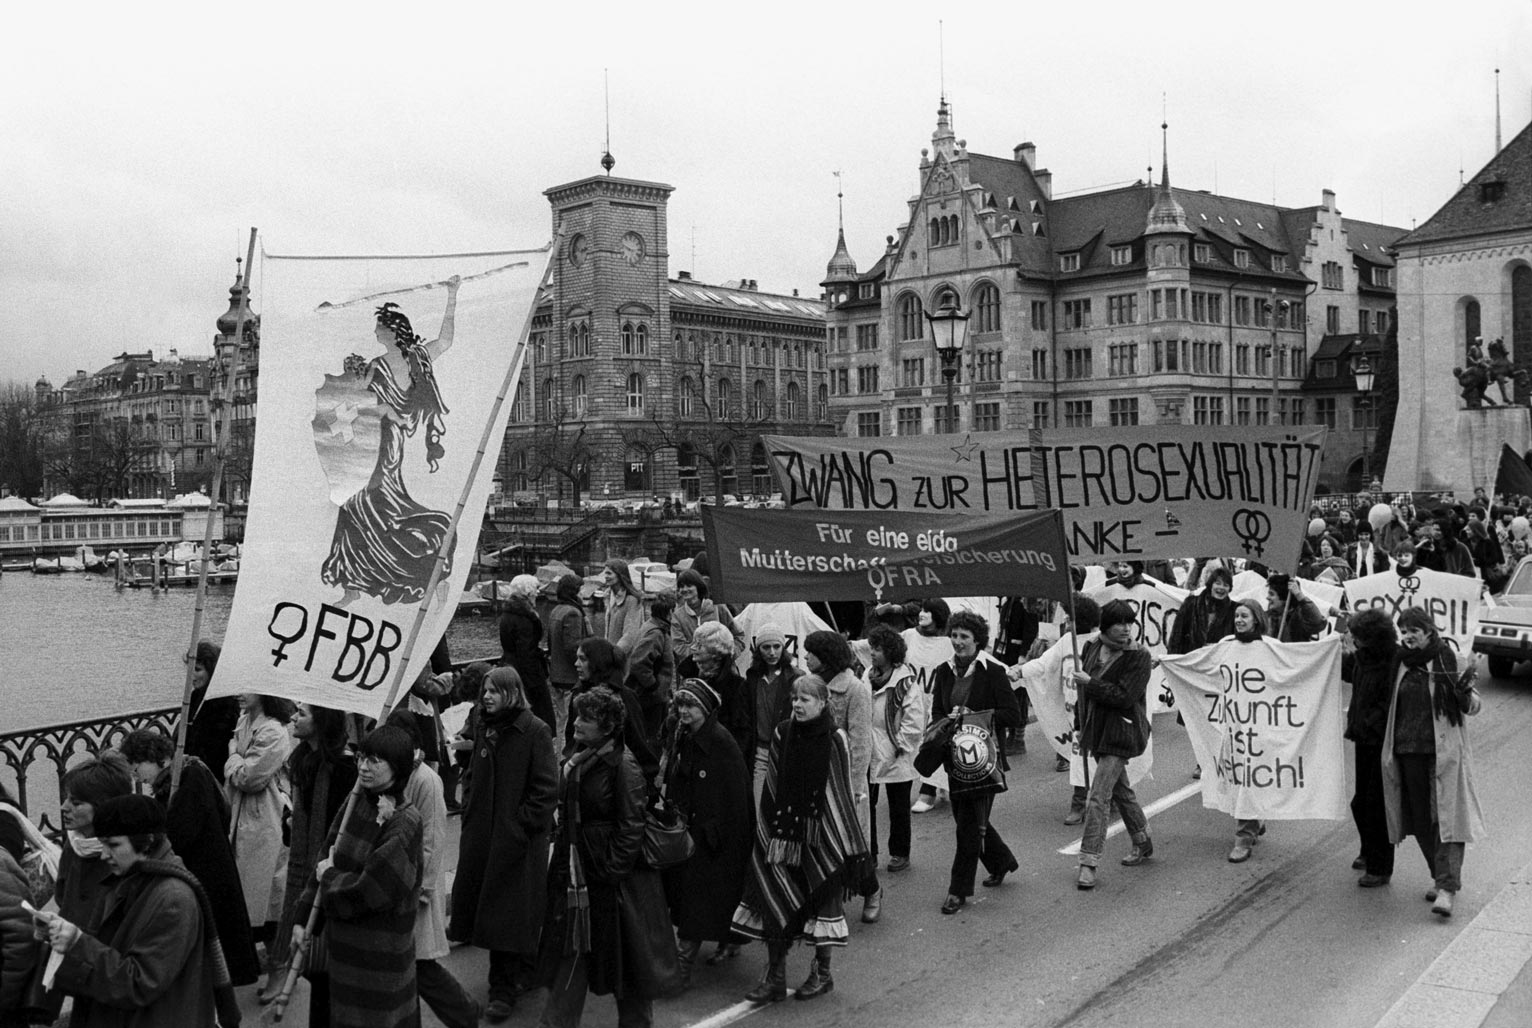 Demonstrations for equal rights for women and sexual minorities in Zurich, 1979. Source: Keystone